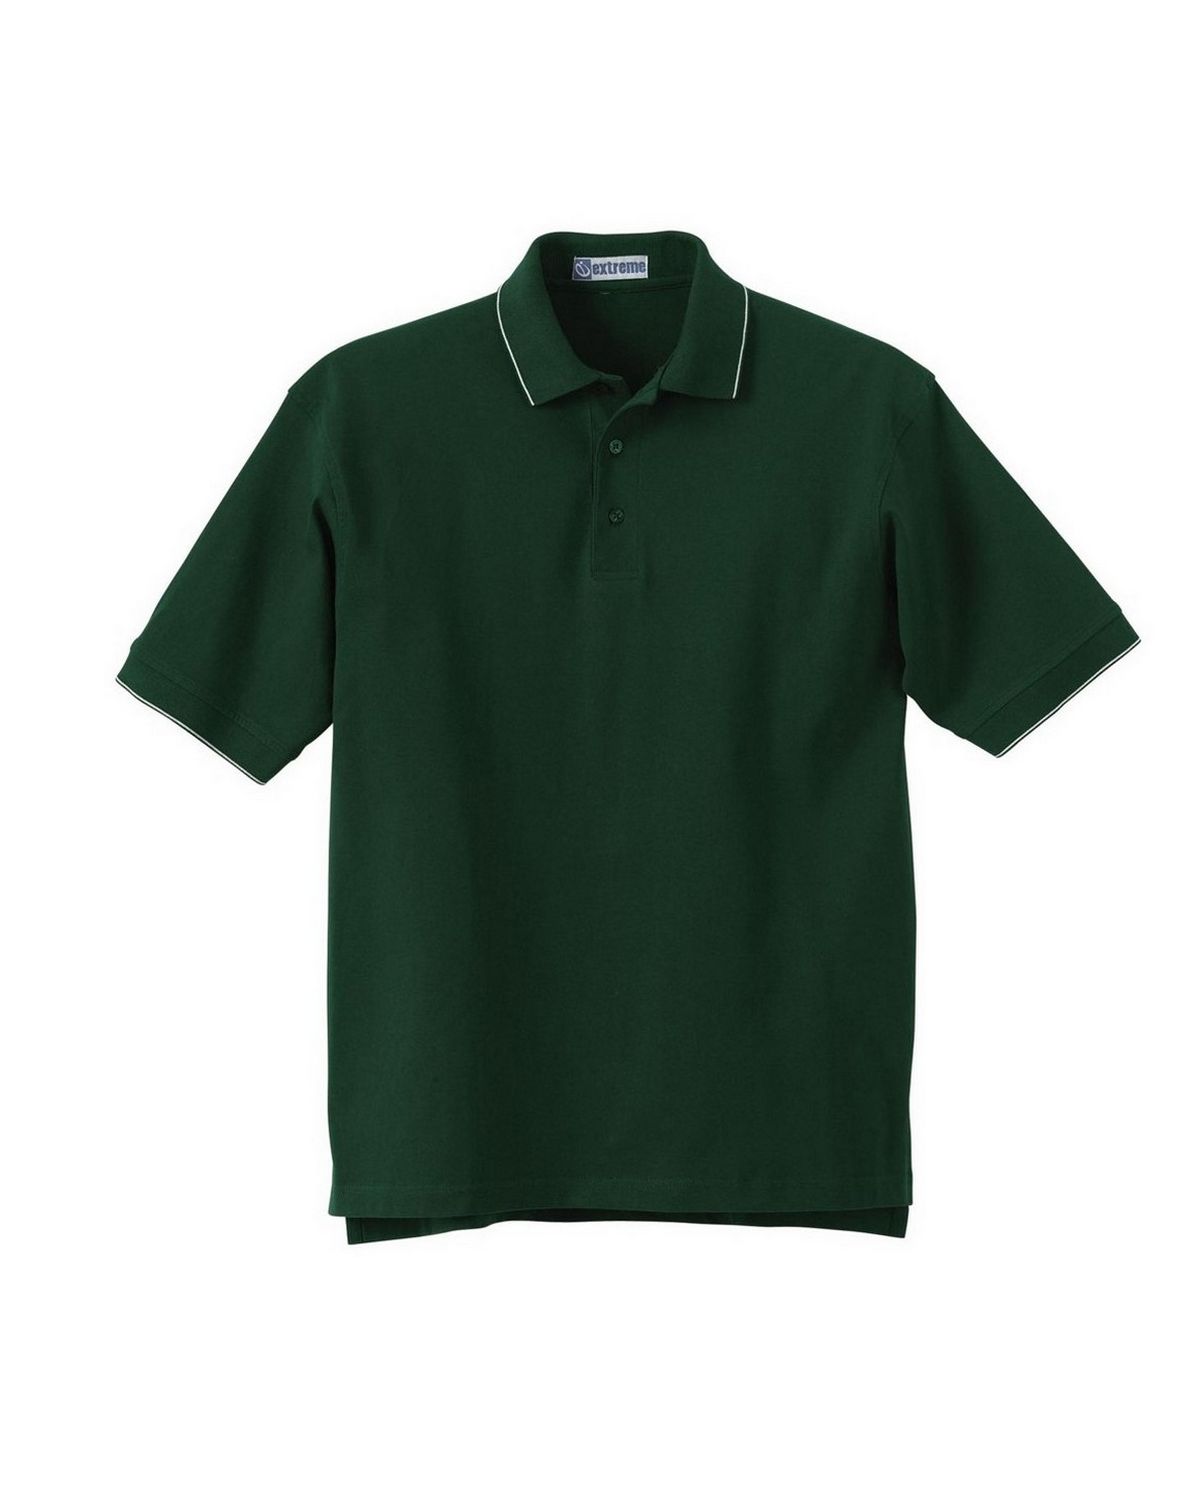 Extreme 85032 Mens Jersey Polo With Pencil Stripe